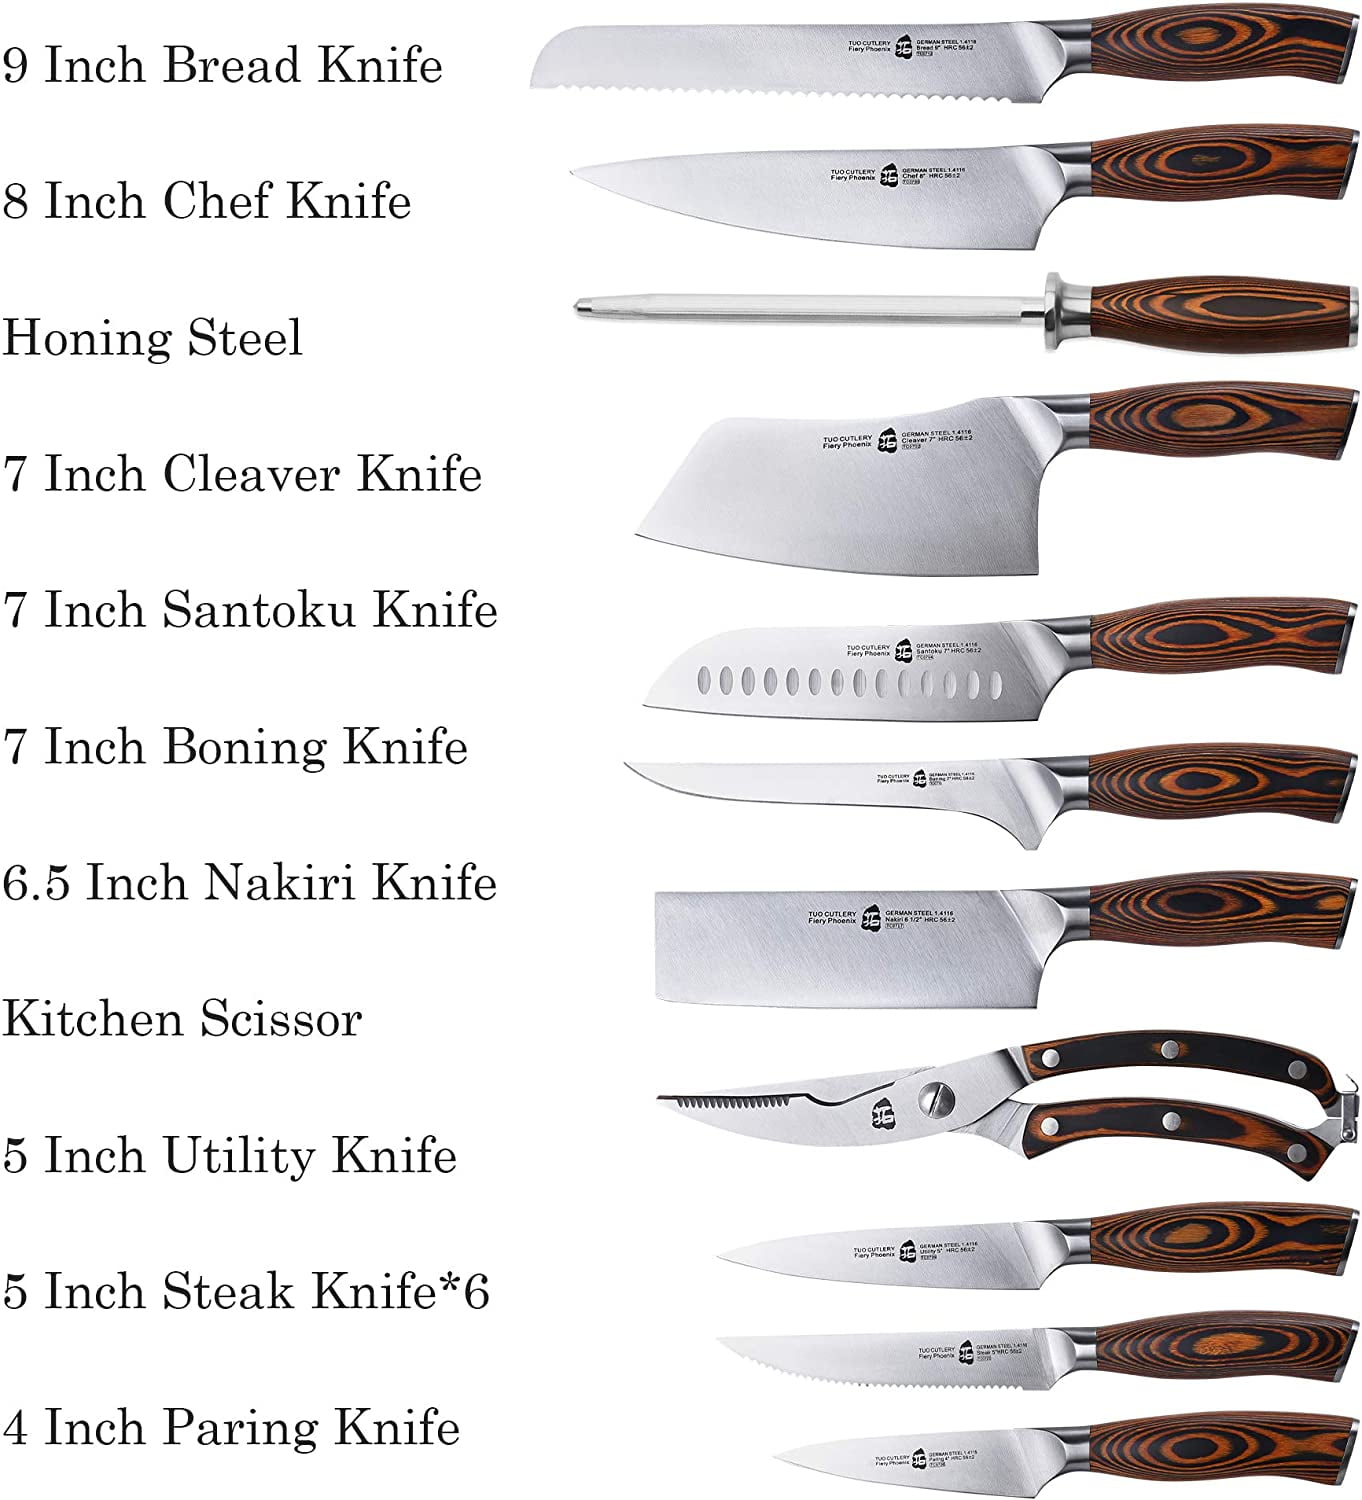 Unimoety Green Craft Kitchen Knives Set of 3, Non Stick 10.8 Professional  Chef Knife, Graffiti Aesthetic 10.5 Carving Steak Knife, 8.2-IN Paring